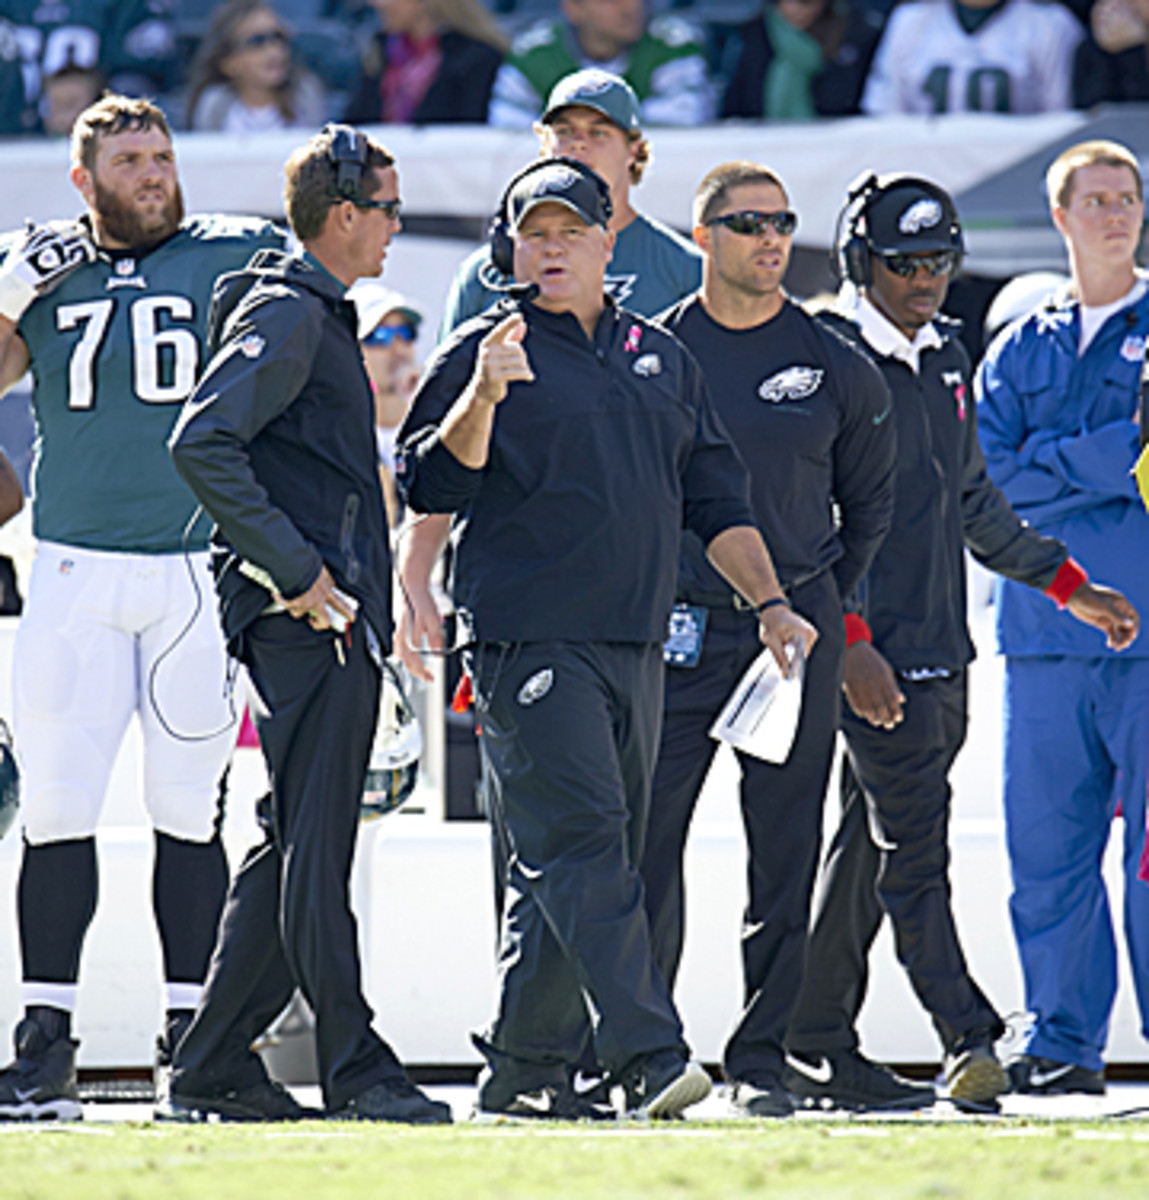 Chip Kelly's offense relies on tempo and intelligent play designs rather than gimmicks. (Al Tielemans /Sports Illustrated)